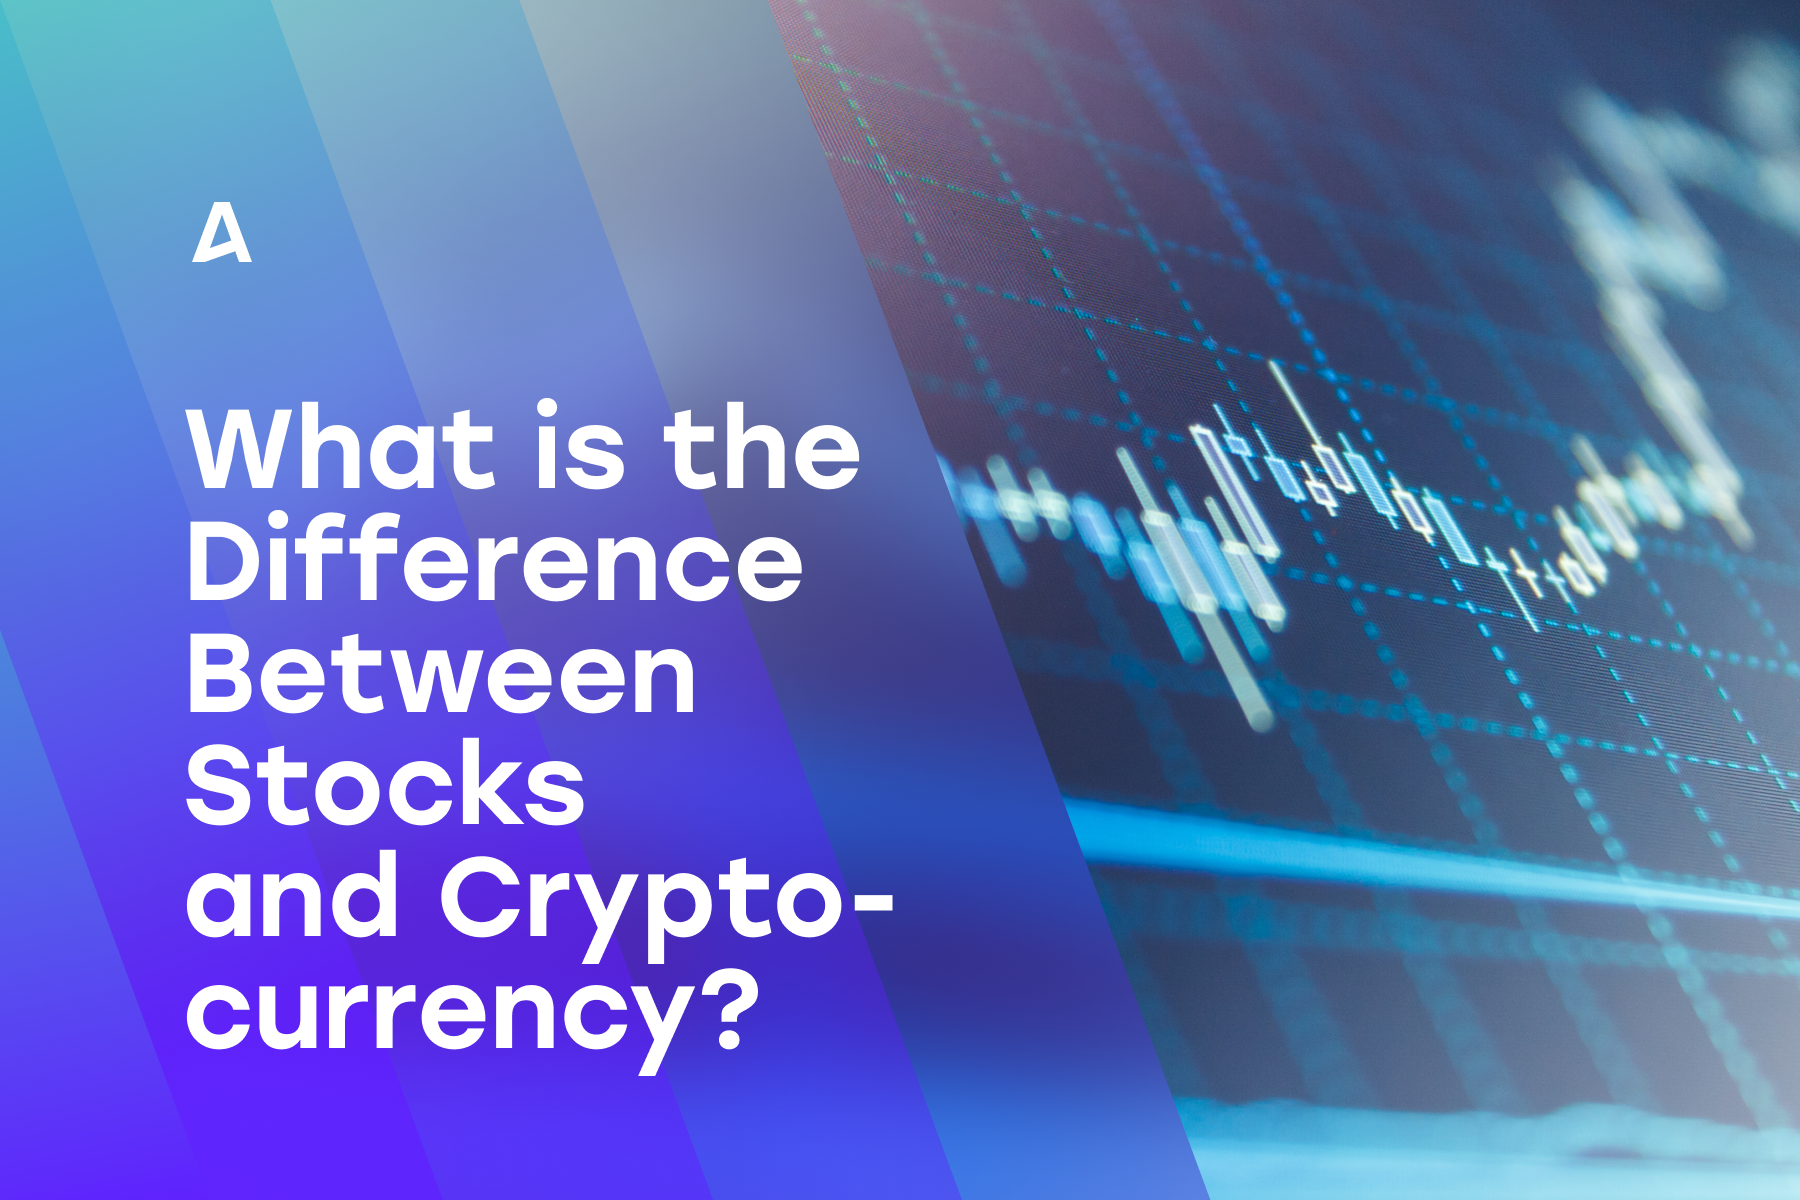 What is the Difference Between Stocks and Cryptocurrency?